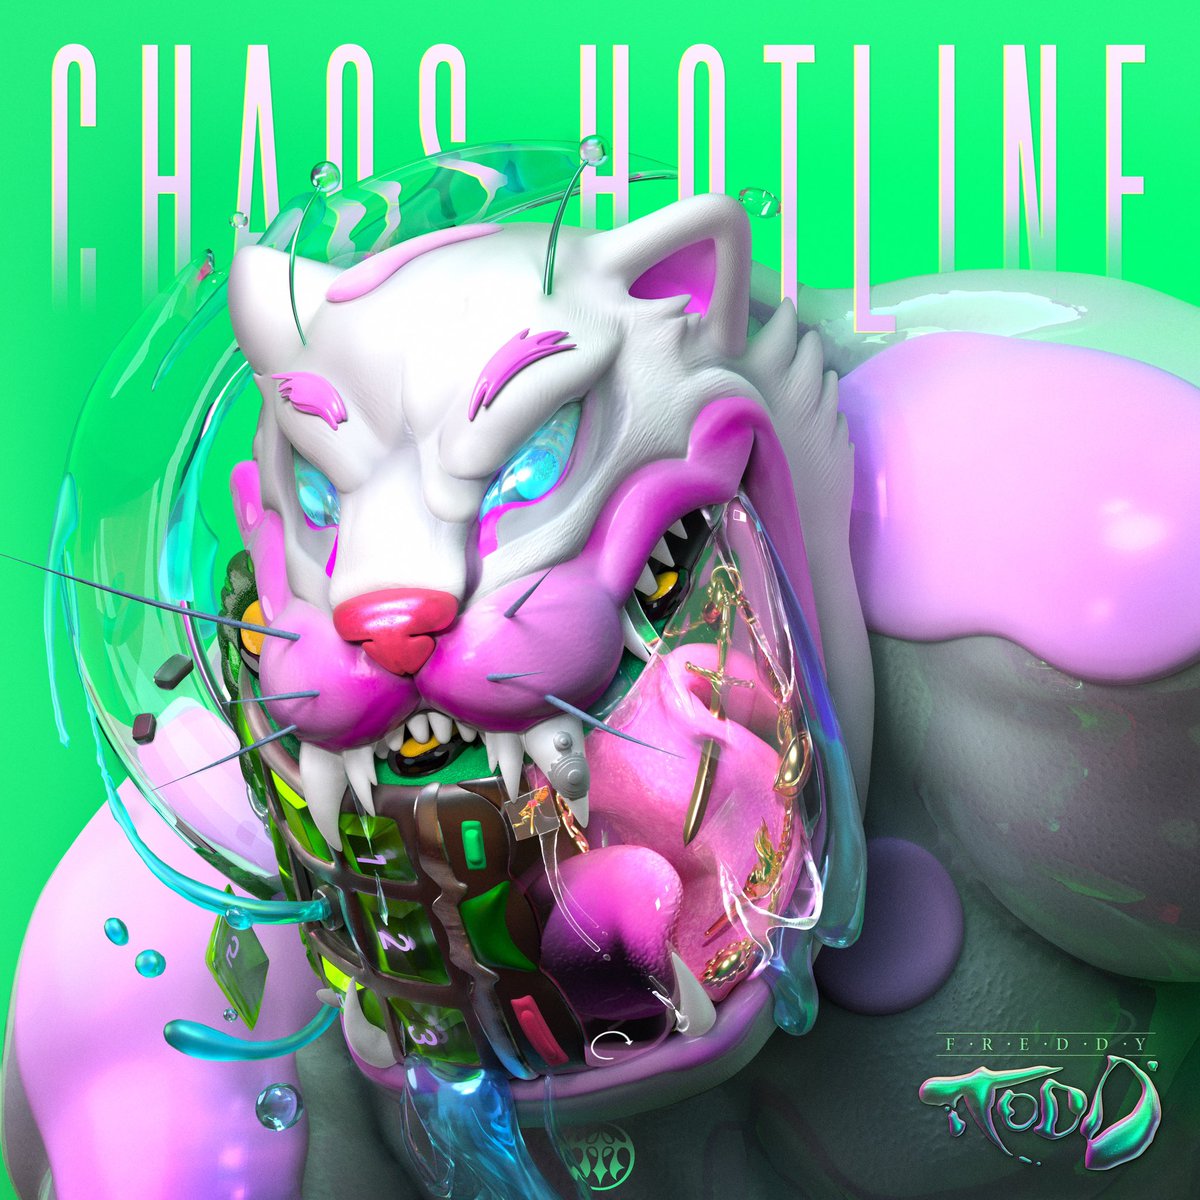 ‘Chaos Hotline' by Freddy Todd has finally arrived, showcasing his legendary sound and unique approach to genre-bending experimentation. Out now, on Memory Palace 🛡